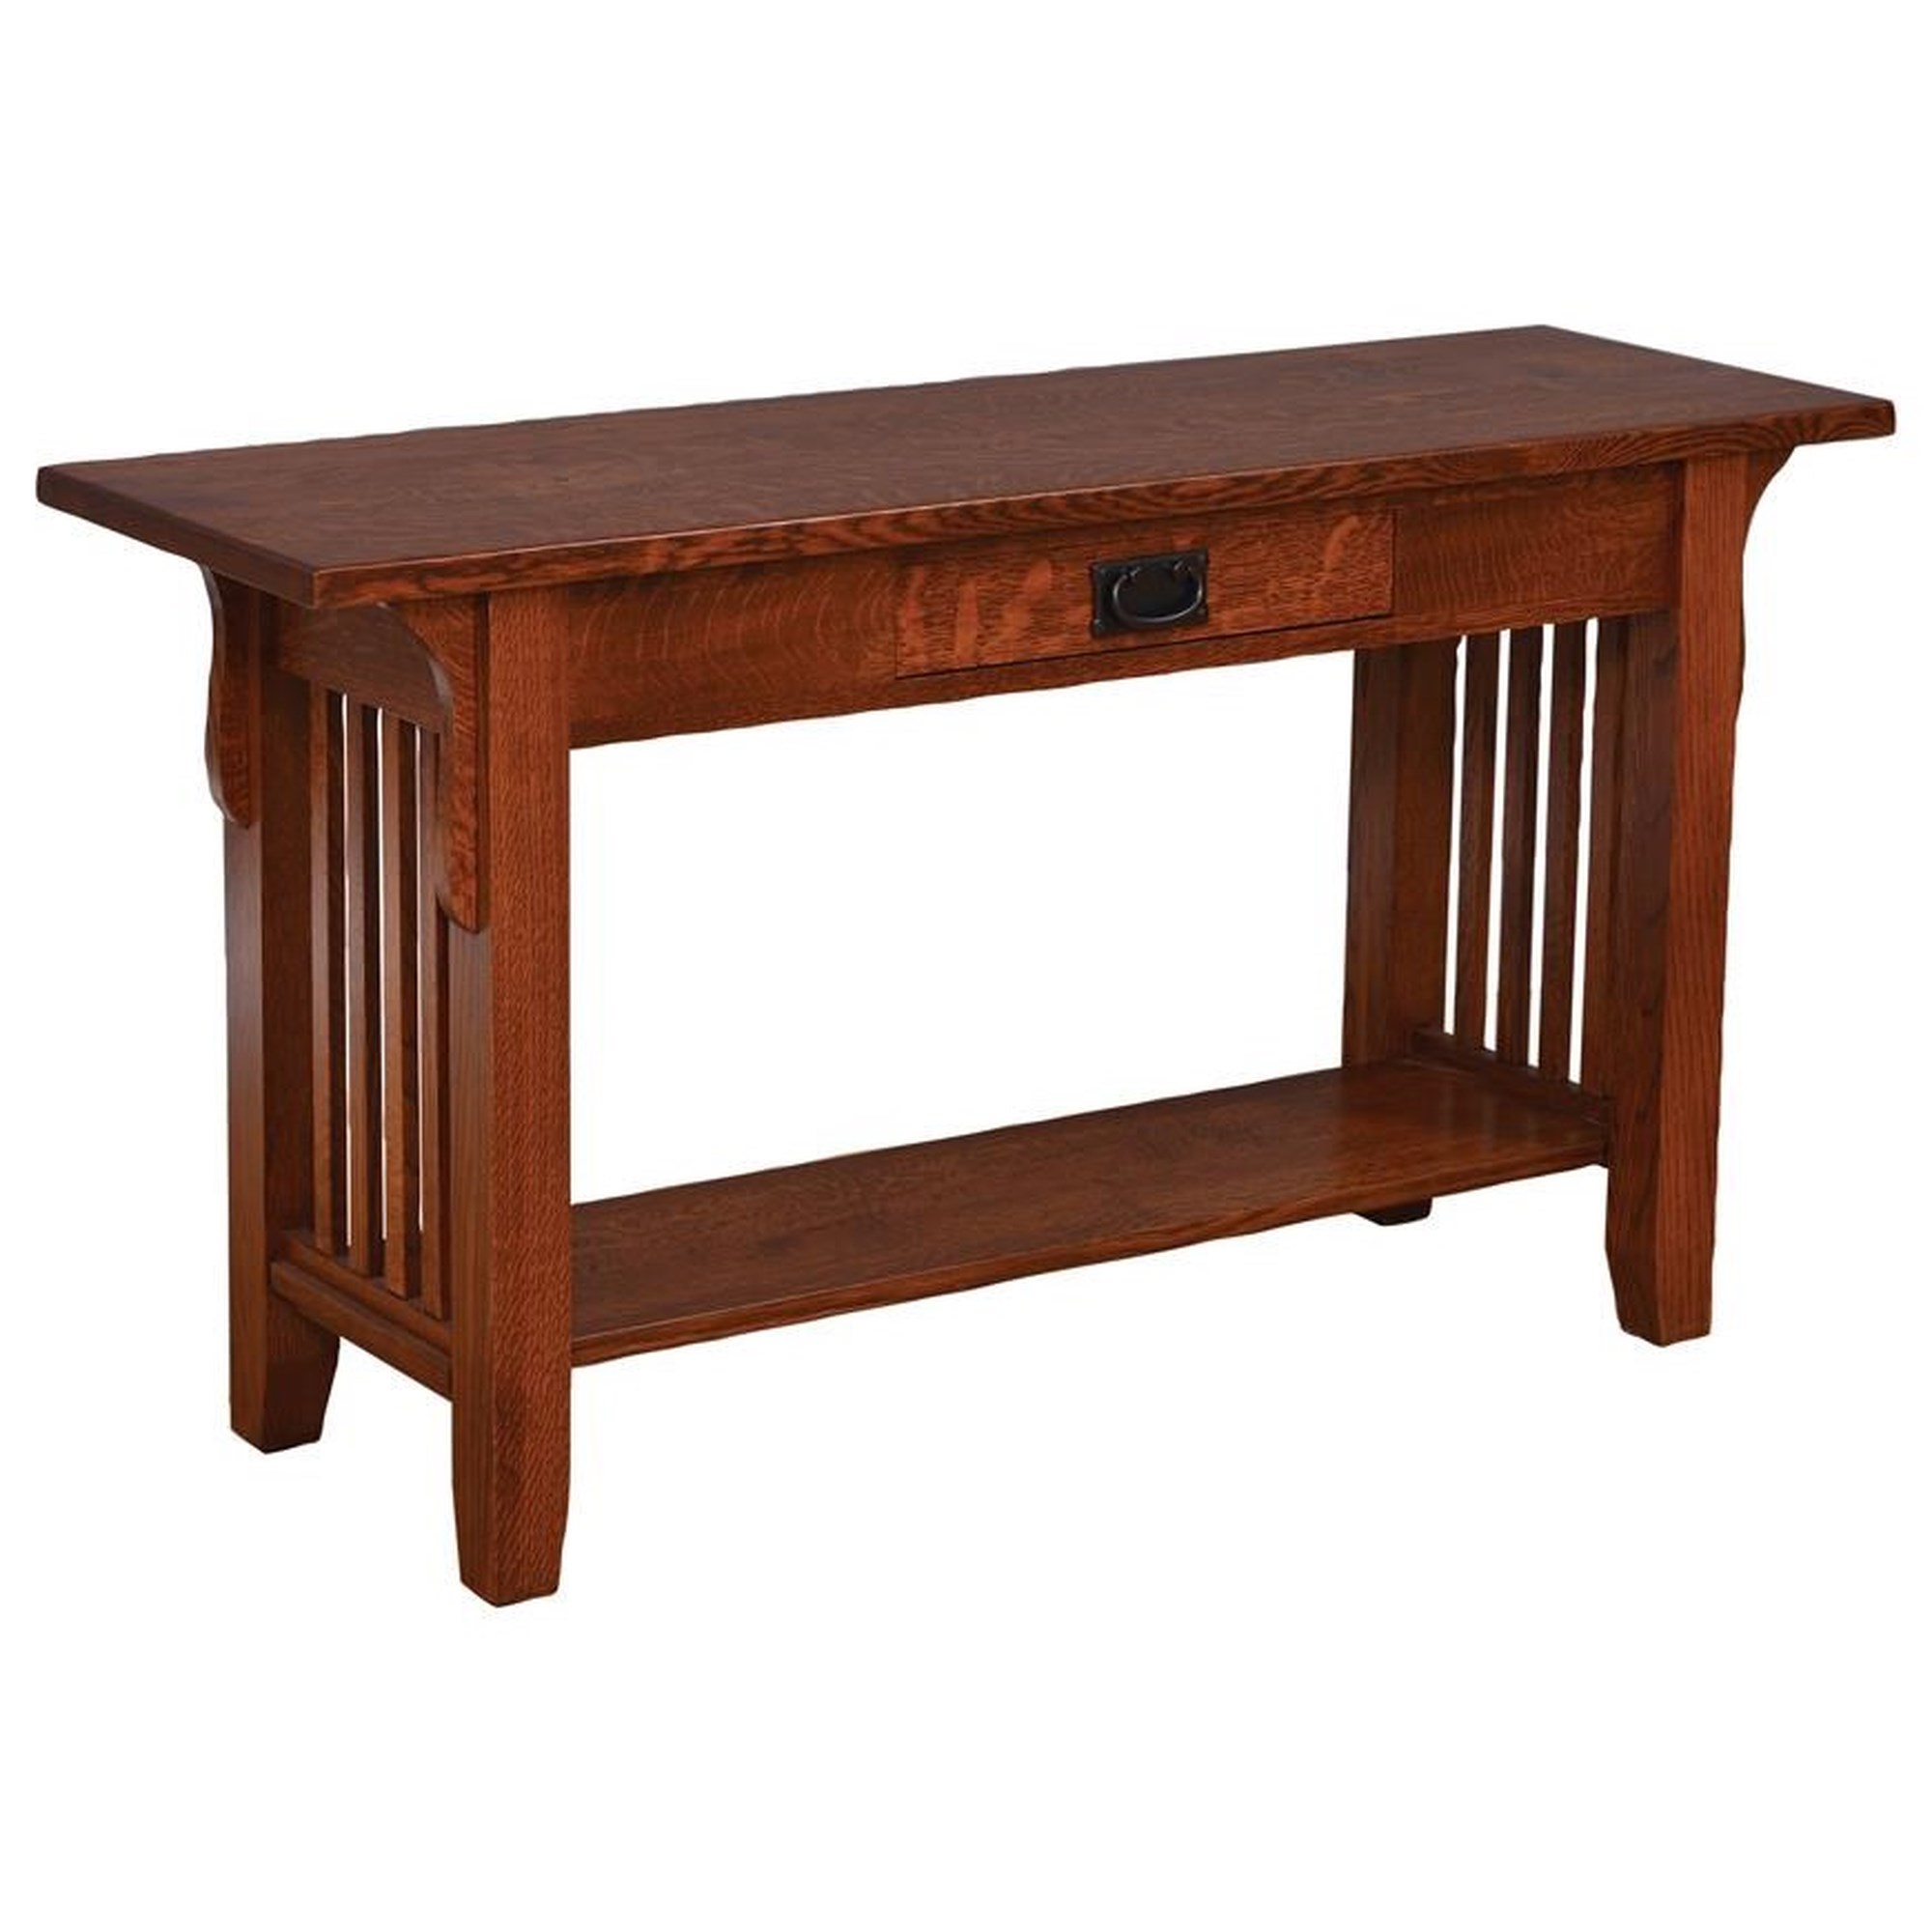 Hopewood Old World Mission 338-010-D-S Sofa Table